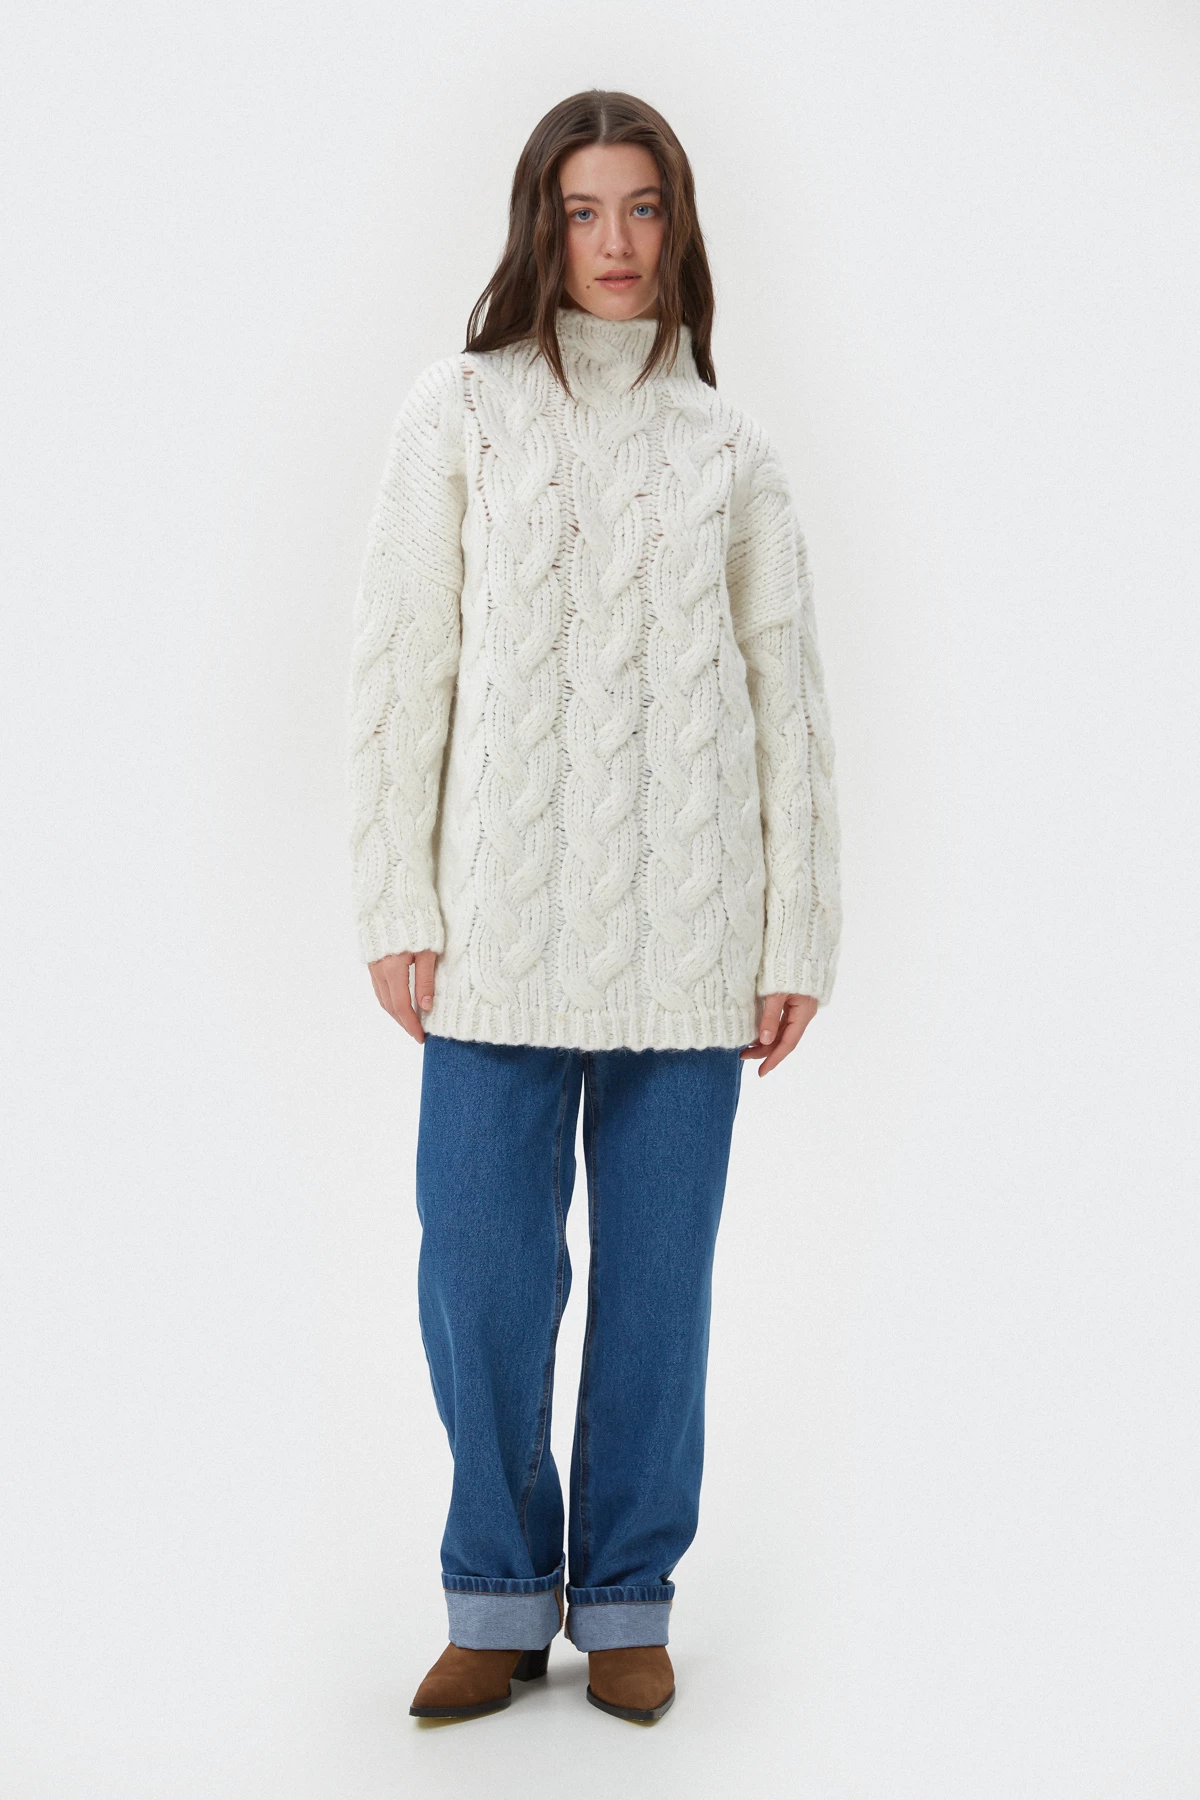 Milky elongated sweater in "braids" with wool, photo 1